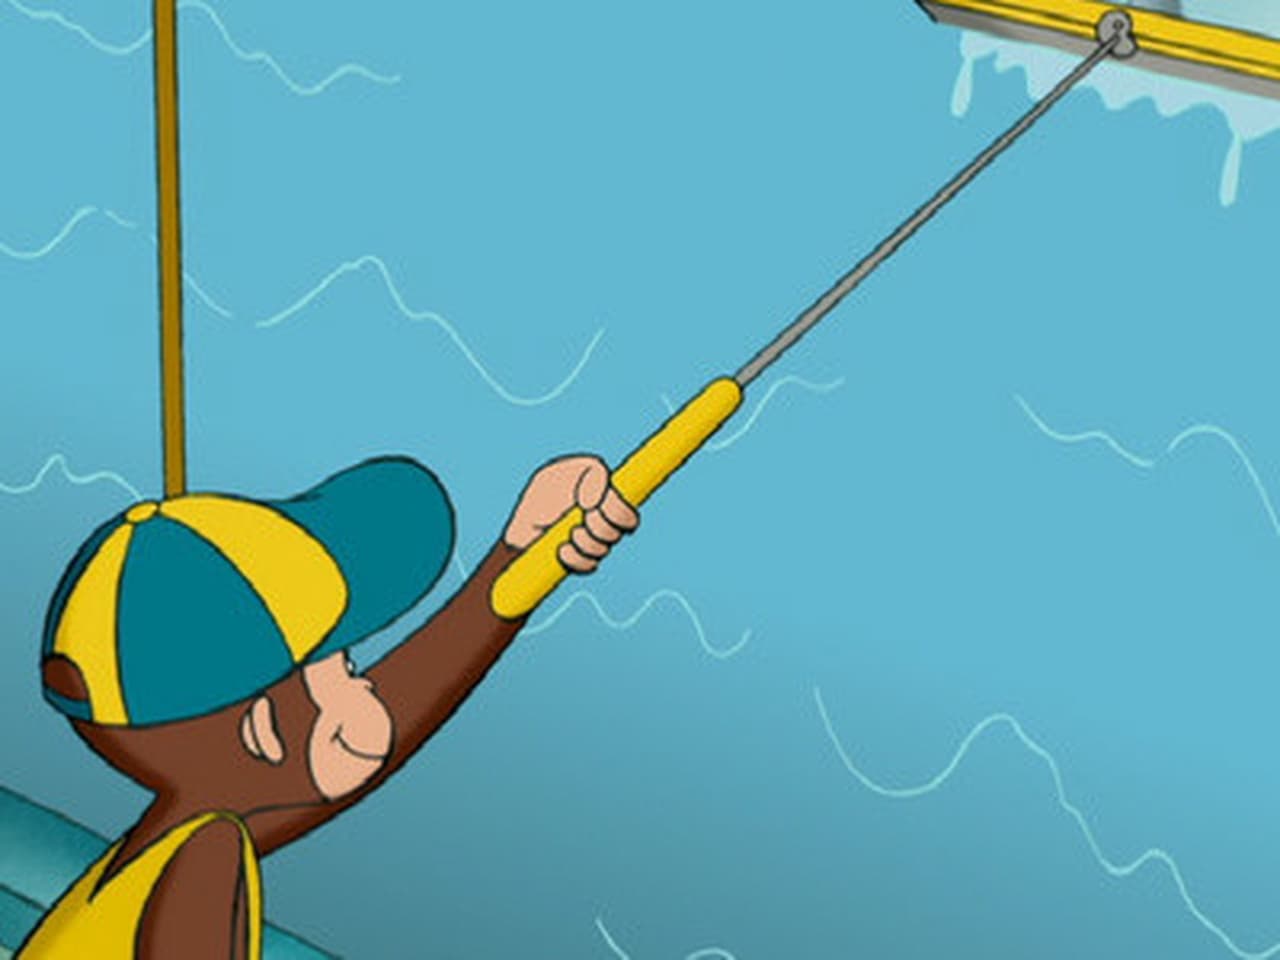 Curious George - Season 1 Episode 12 : Curious George Takes Another Job